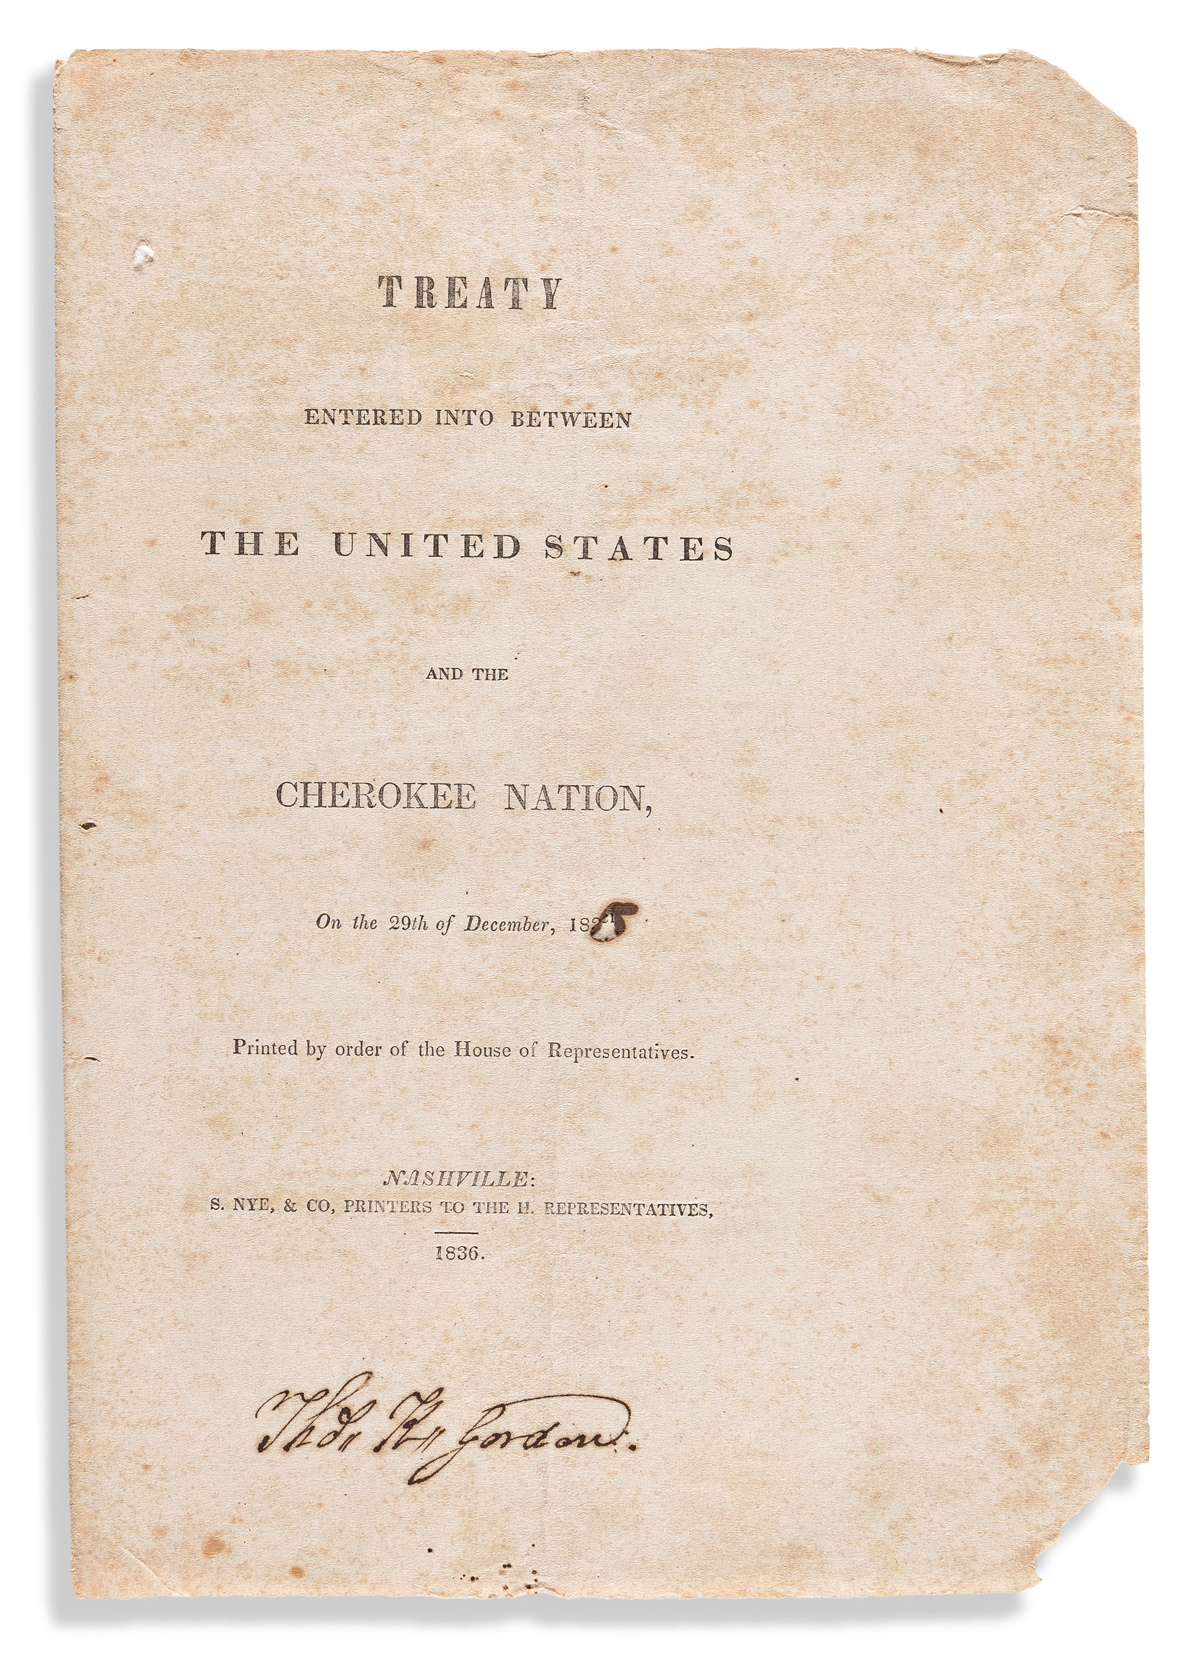 (AMERICAN INDIANS.) Treaty Entered into between the United States and the Cherokee Nation.